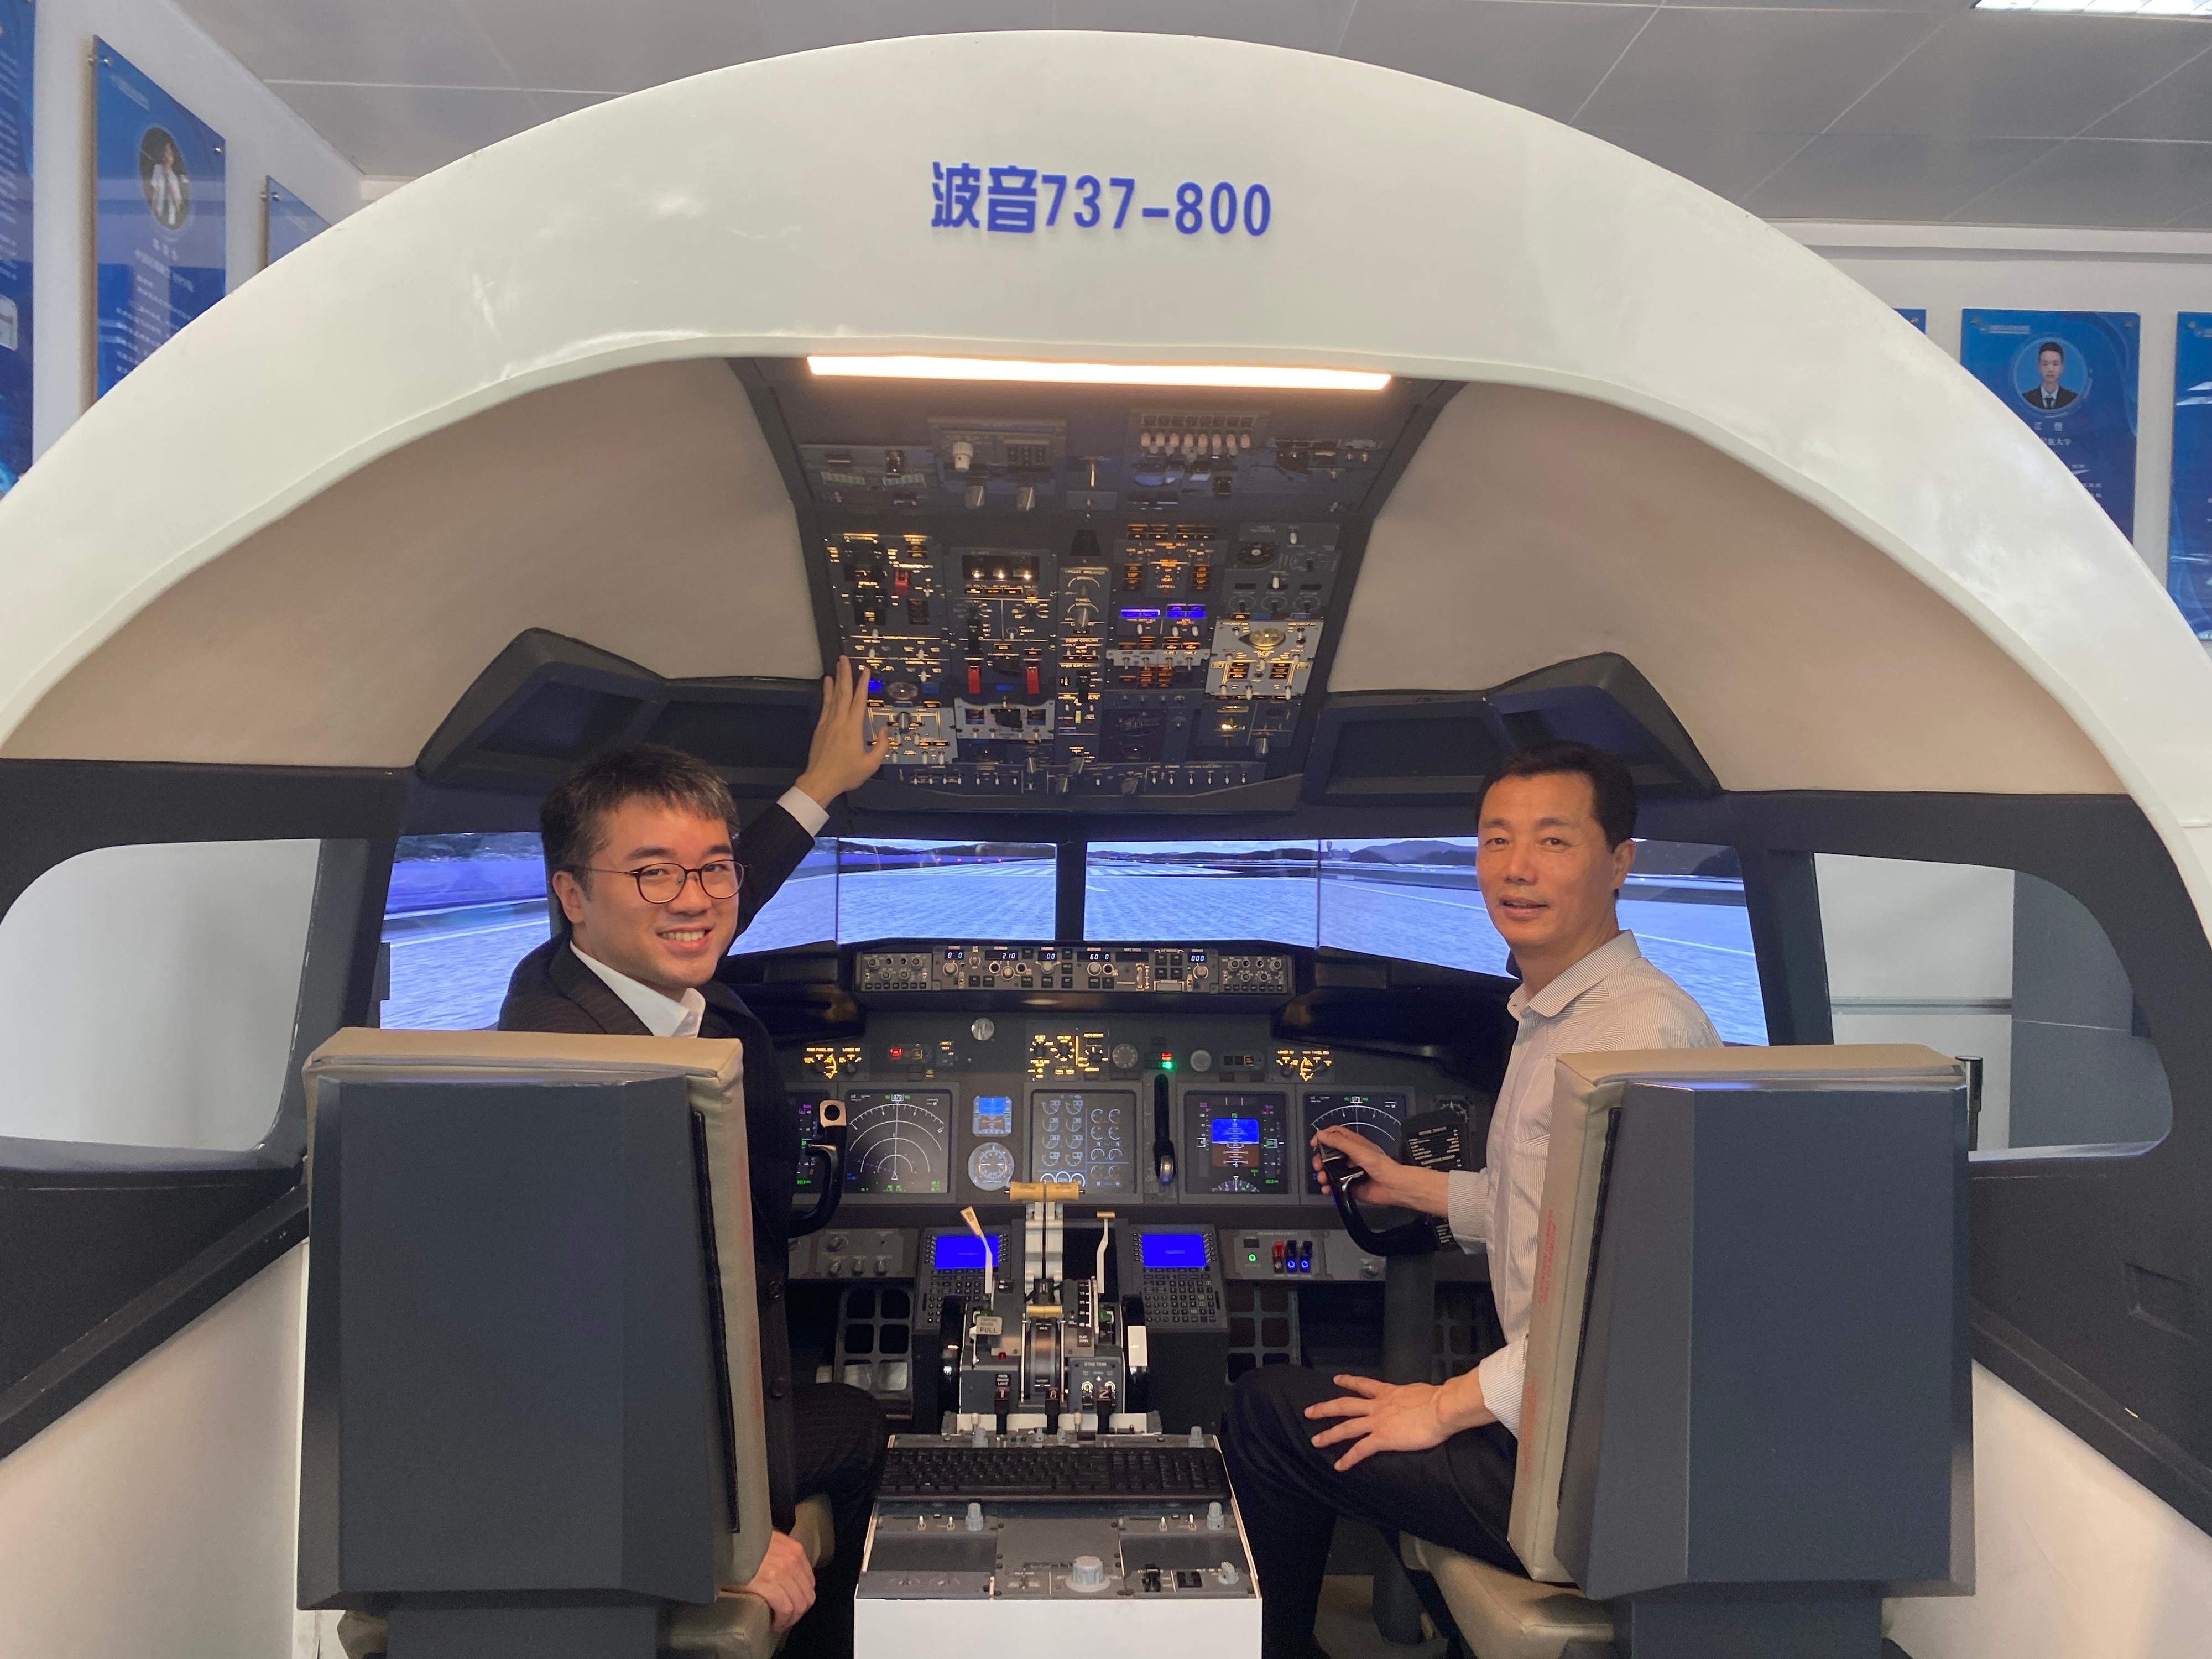 The Under Secretary for Education, Mr Sze Chun-fai, visited Shenzhen Second Foreign Languages School (SSFLS) today (May 18) to participate in a sister school exchange activity for Queen Elizabeth School and SSFLS. Photo shows Mr Sze (left) visiting the school's flight simulator.